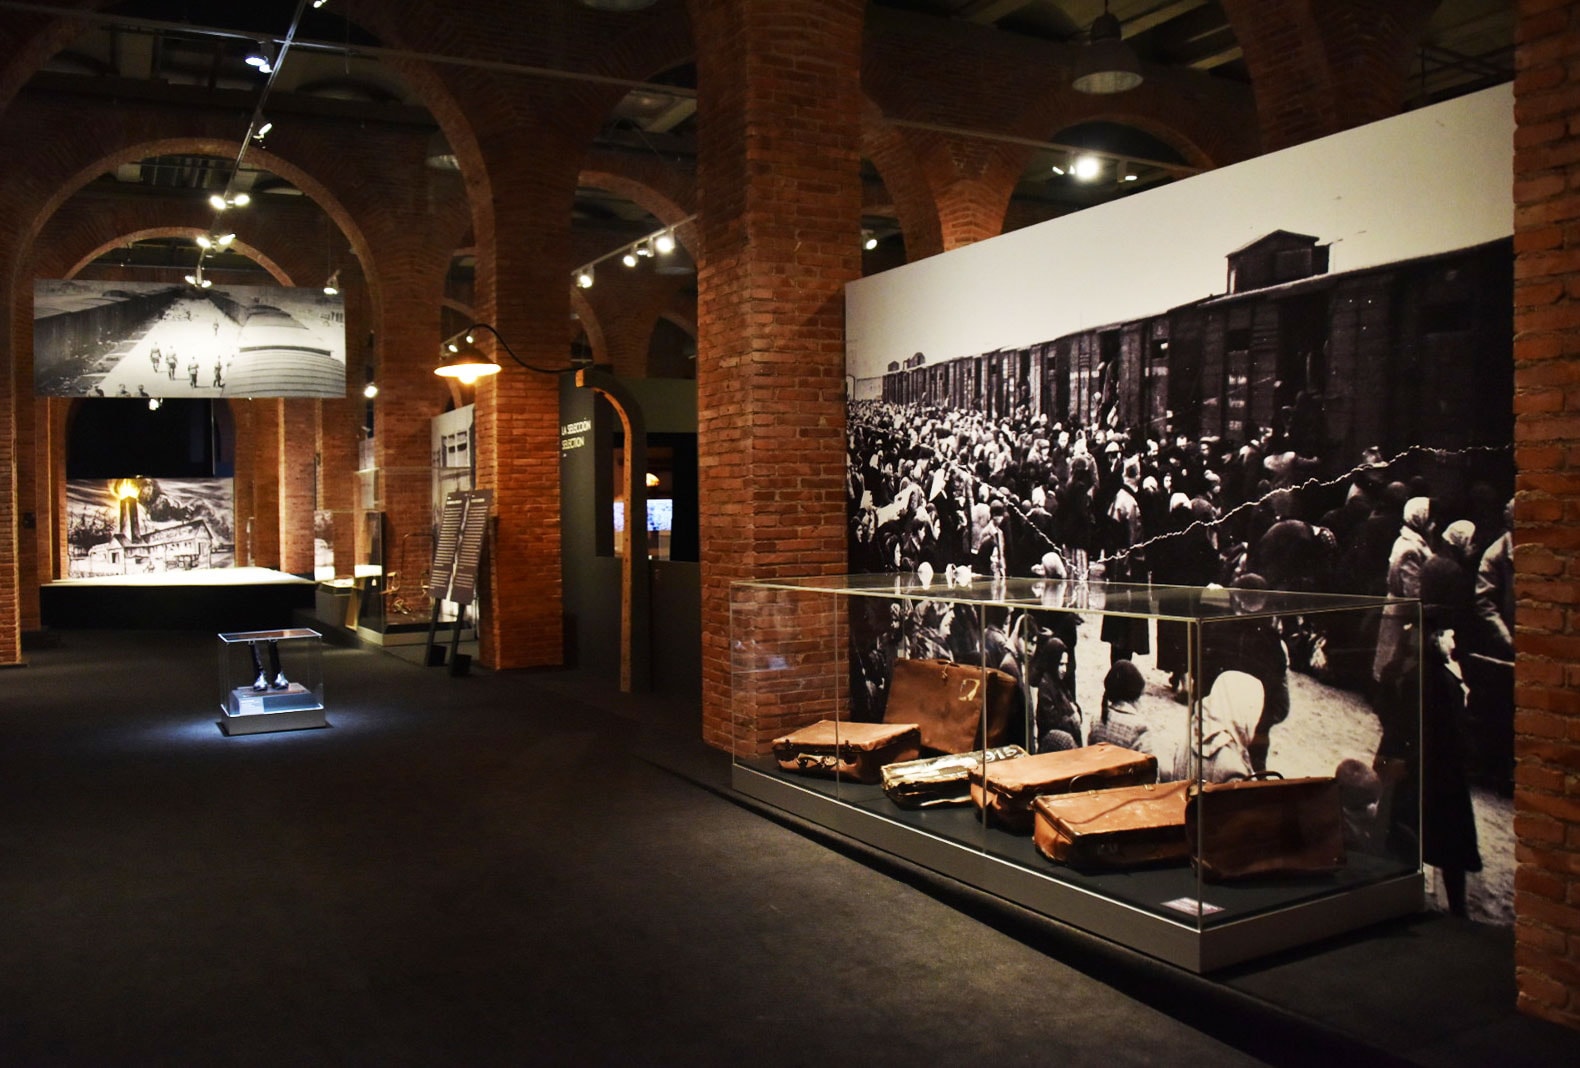 travelling exhibition showcases